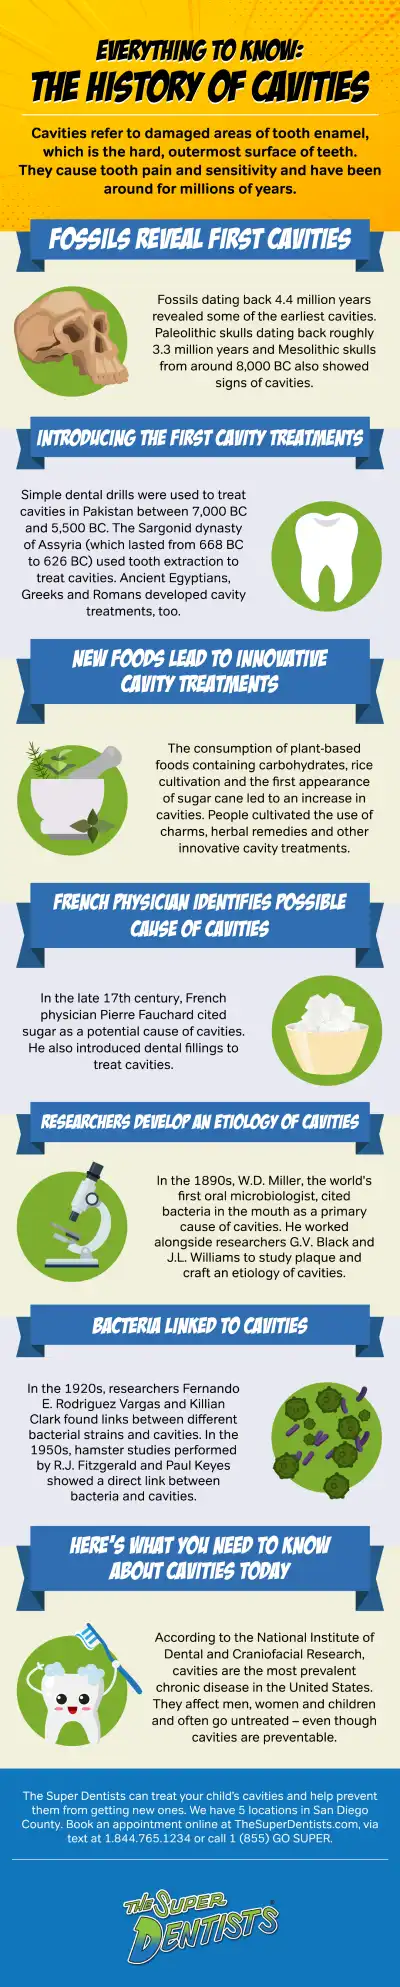 Infographic on History of Cavities & First Cavity Treatment Before Dentists - The Super Dentists